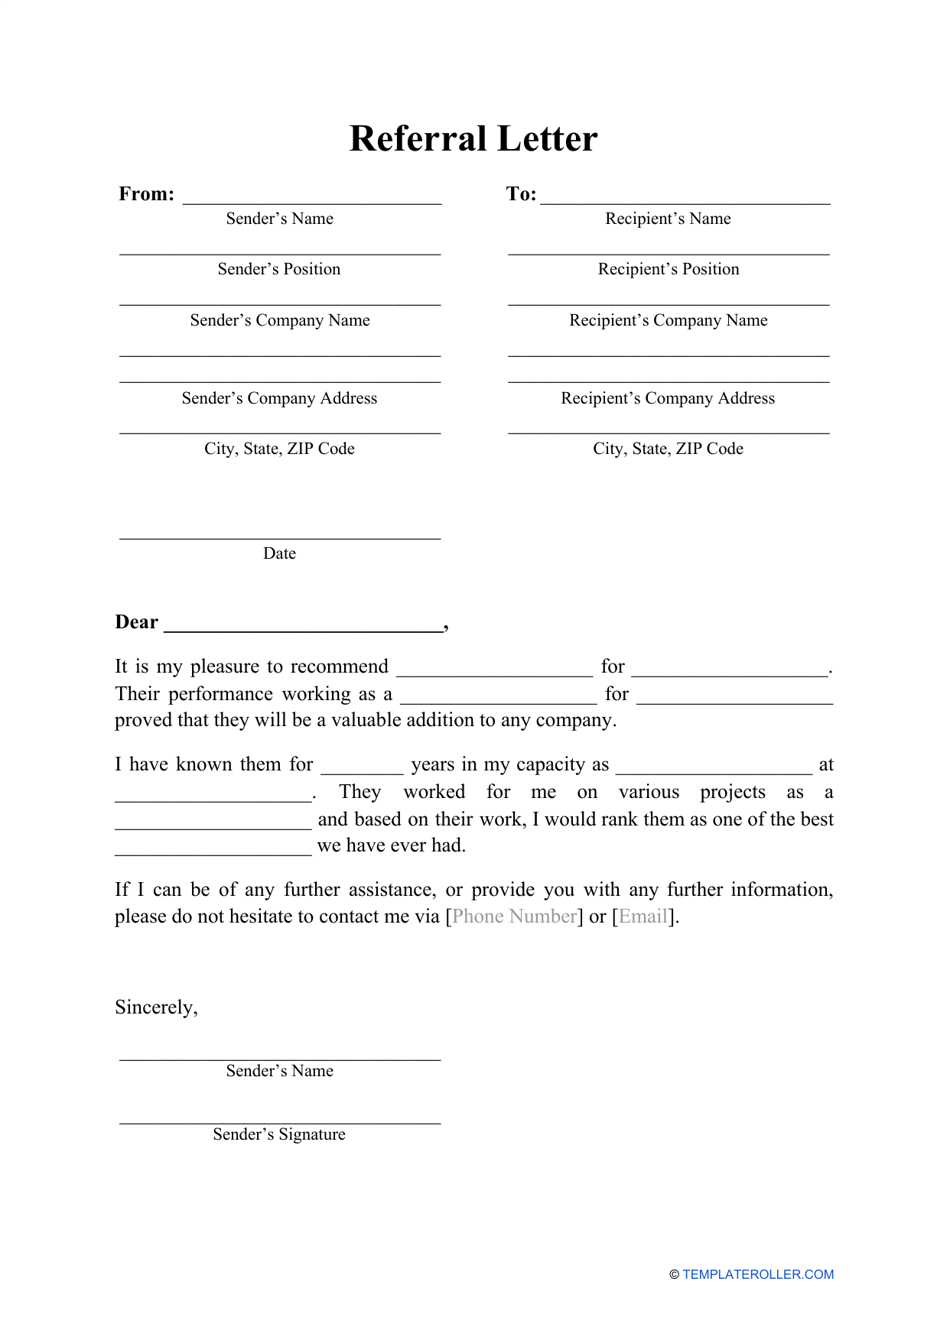 referral-letter-template-download-printable-pdf-templateroller